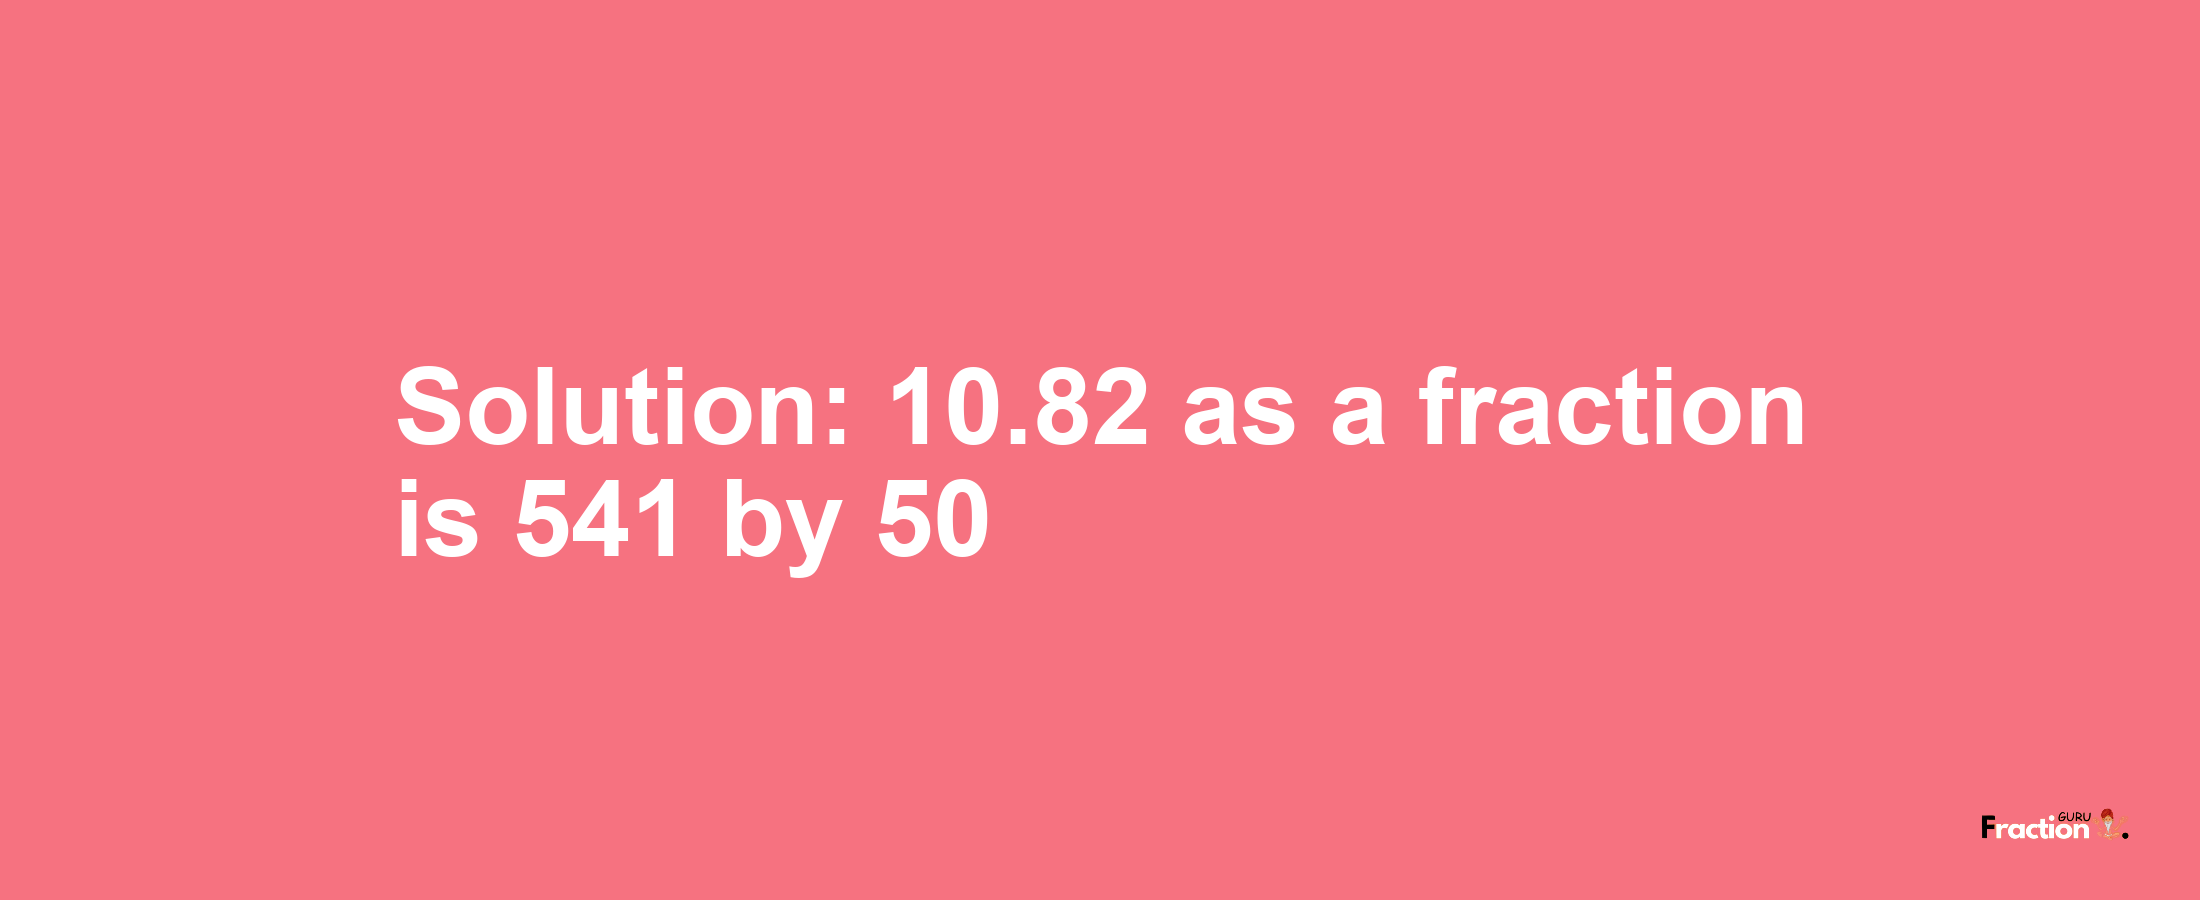 Solution:10.82 as a fraction is 541/50